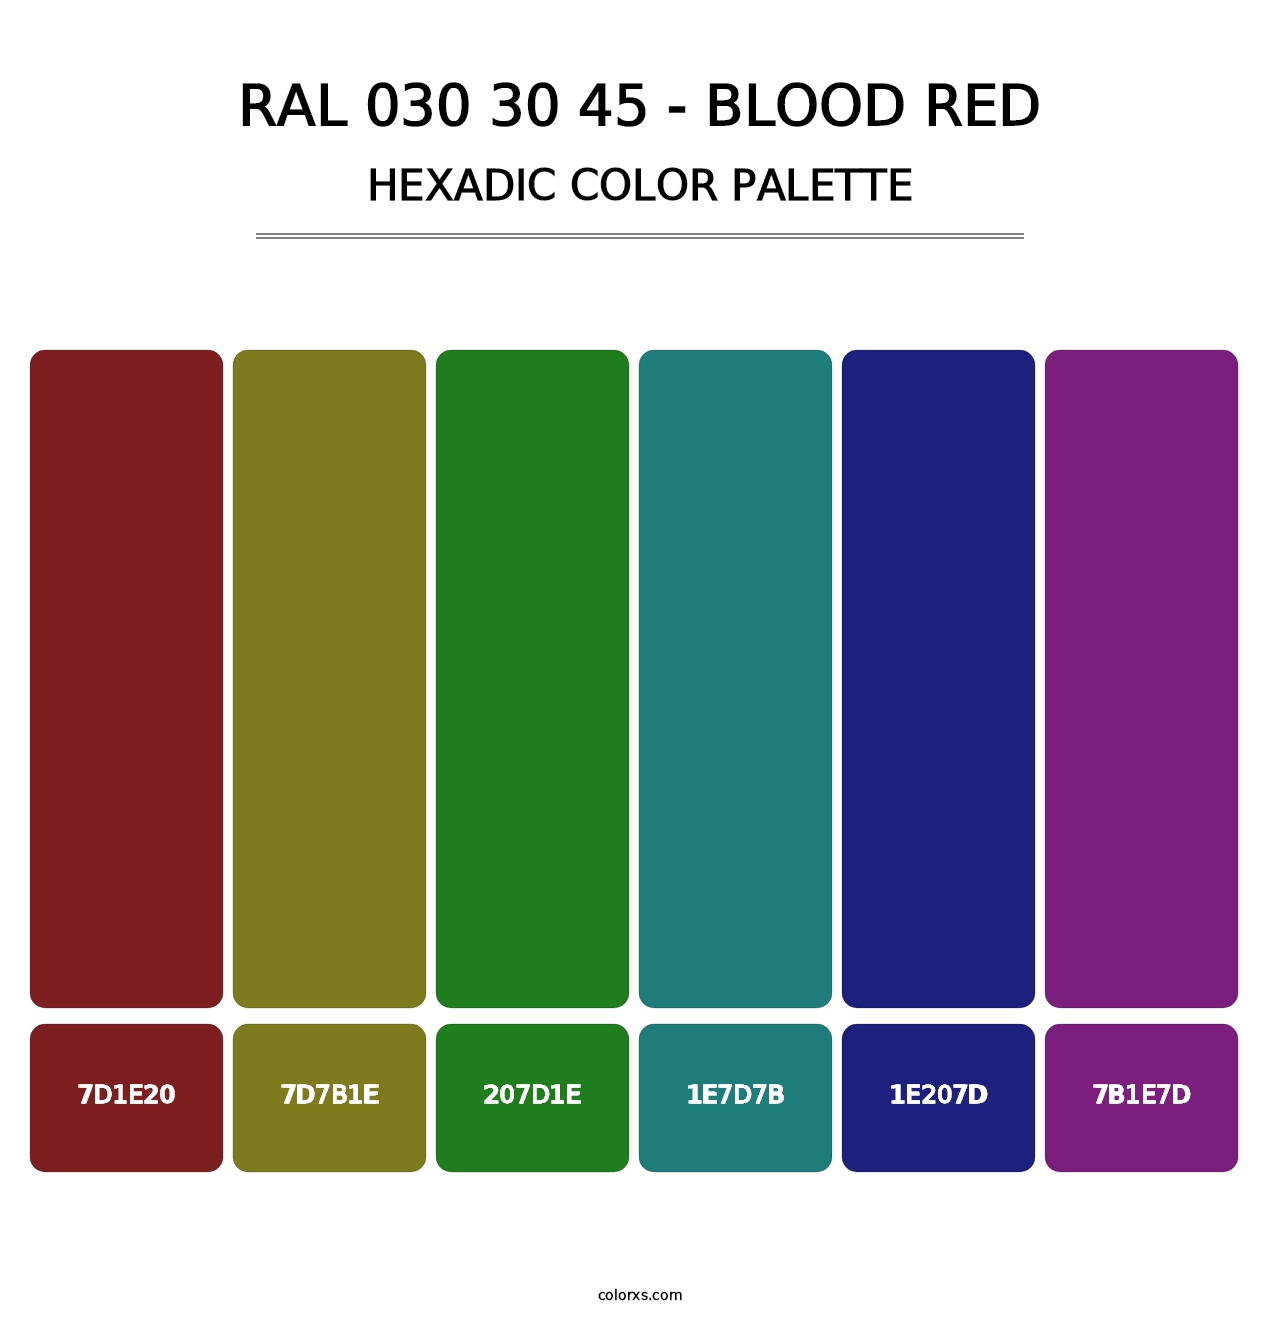 RAL 030 30 45 - Blood Red - Hexadic Color Palette